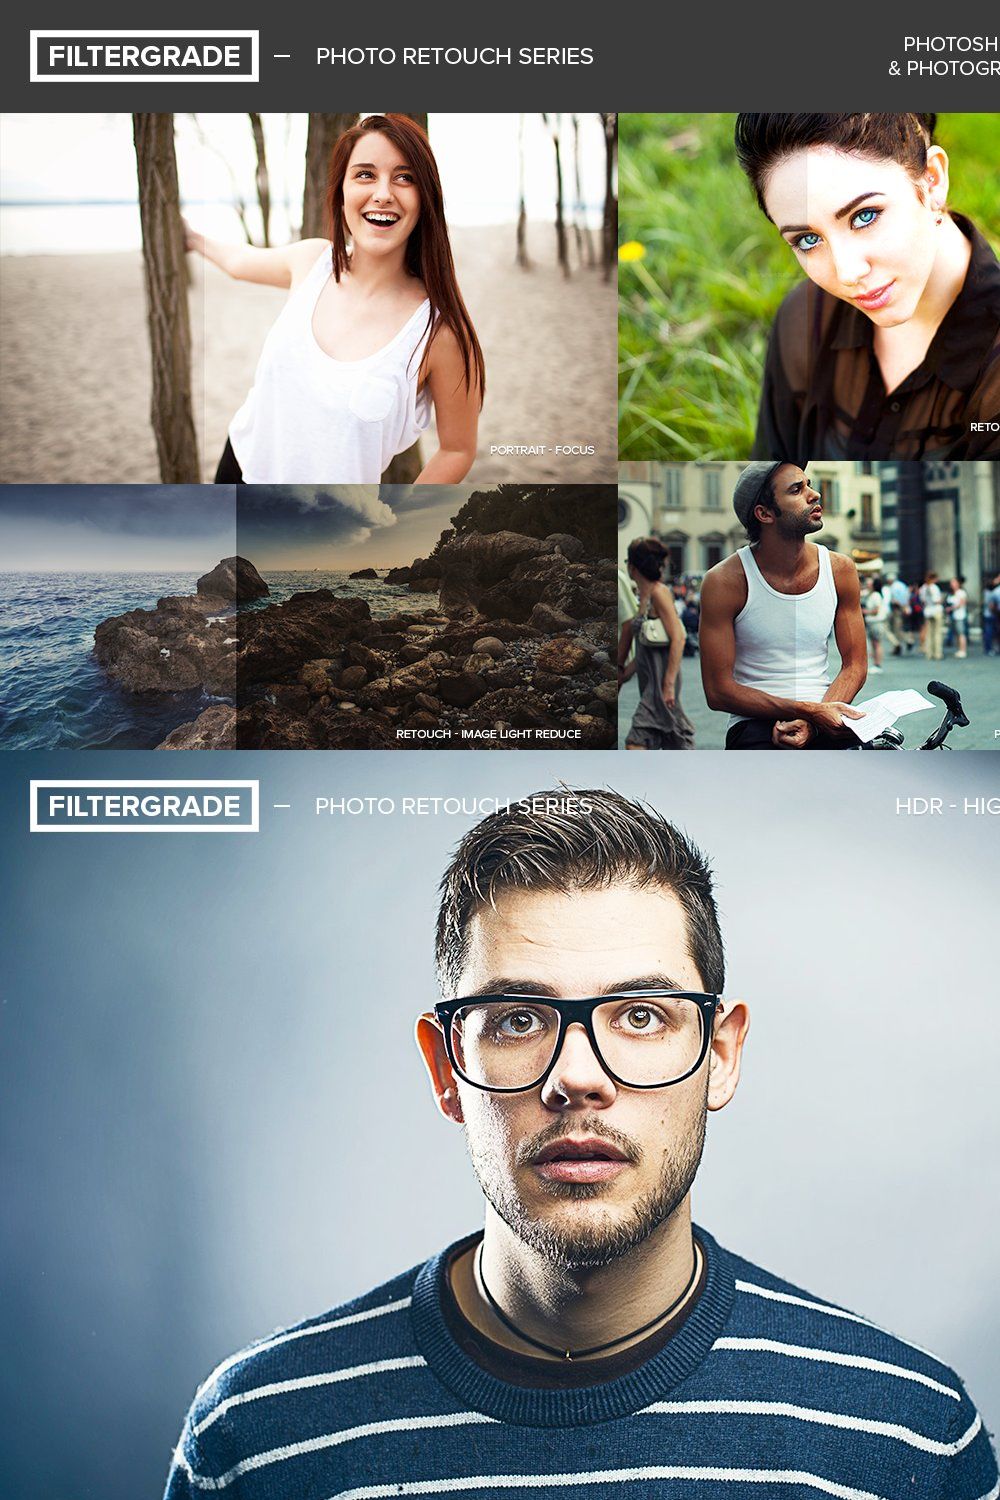 FilterGrade Photo Retouch Series pinterest preview image.